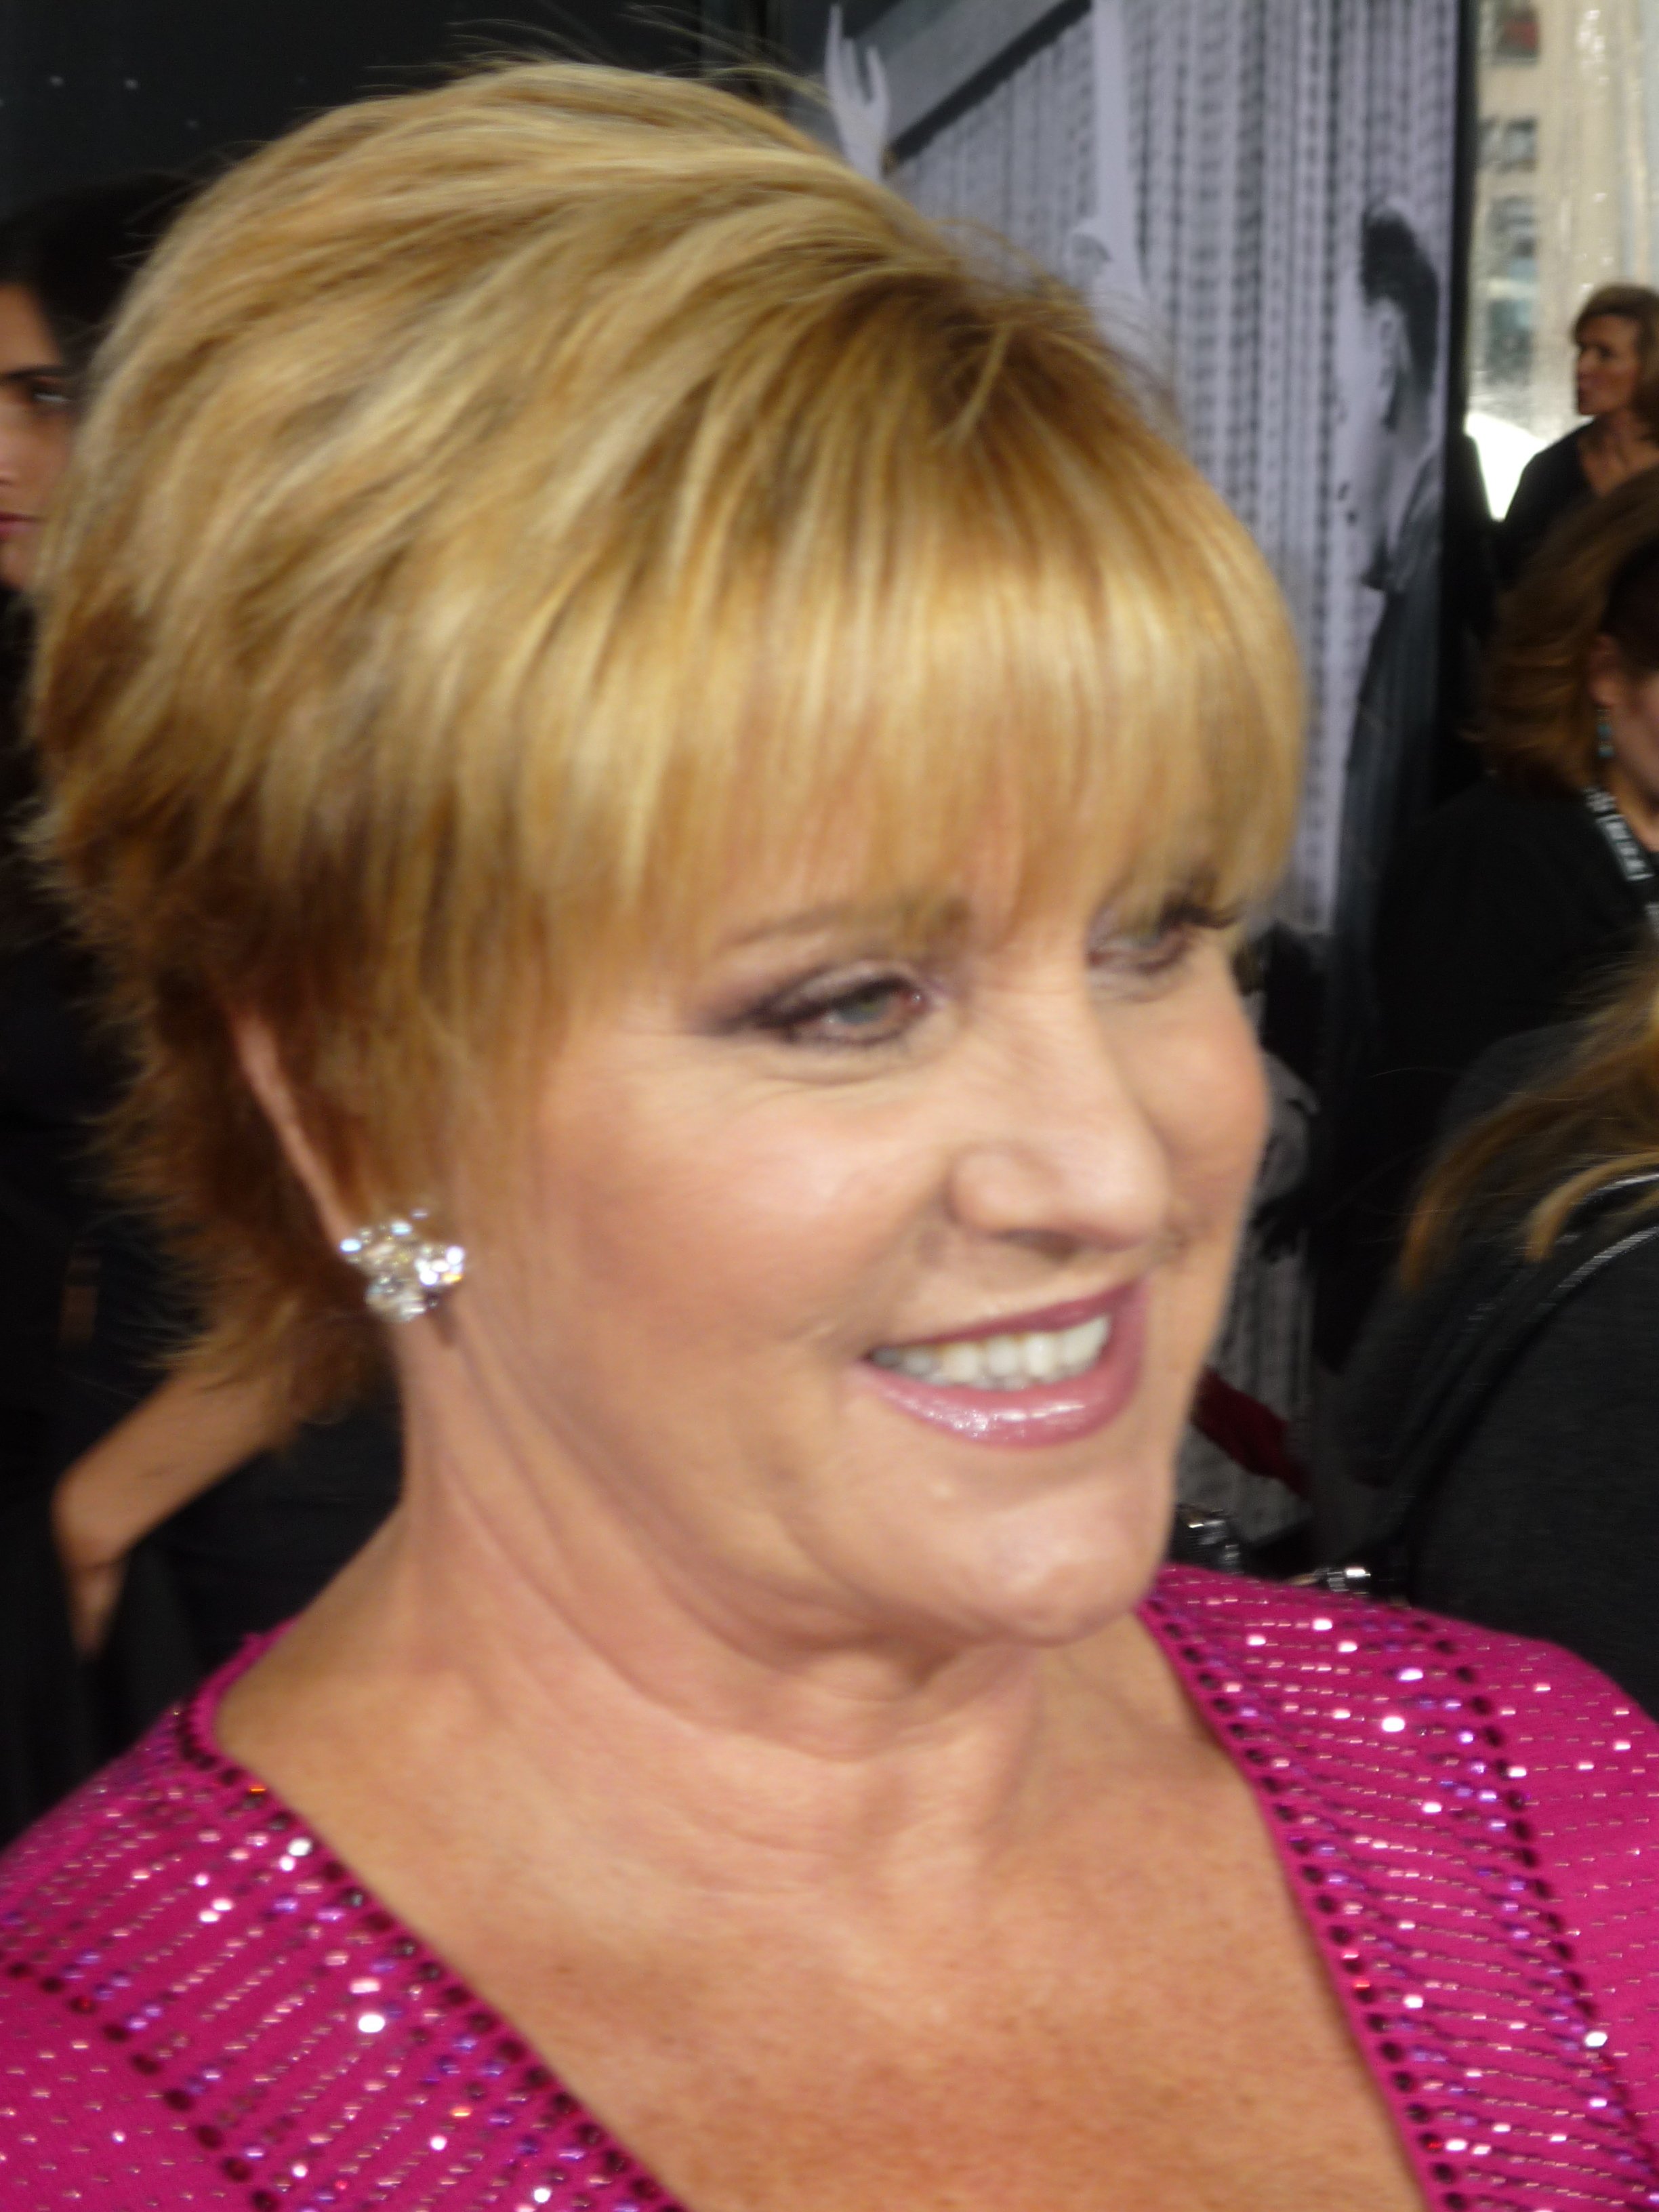 Lorna Luft speaking to media personnel in May 2010 | Source: Wikimedia Commons